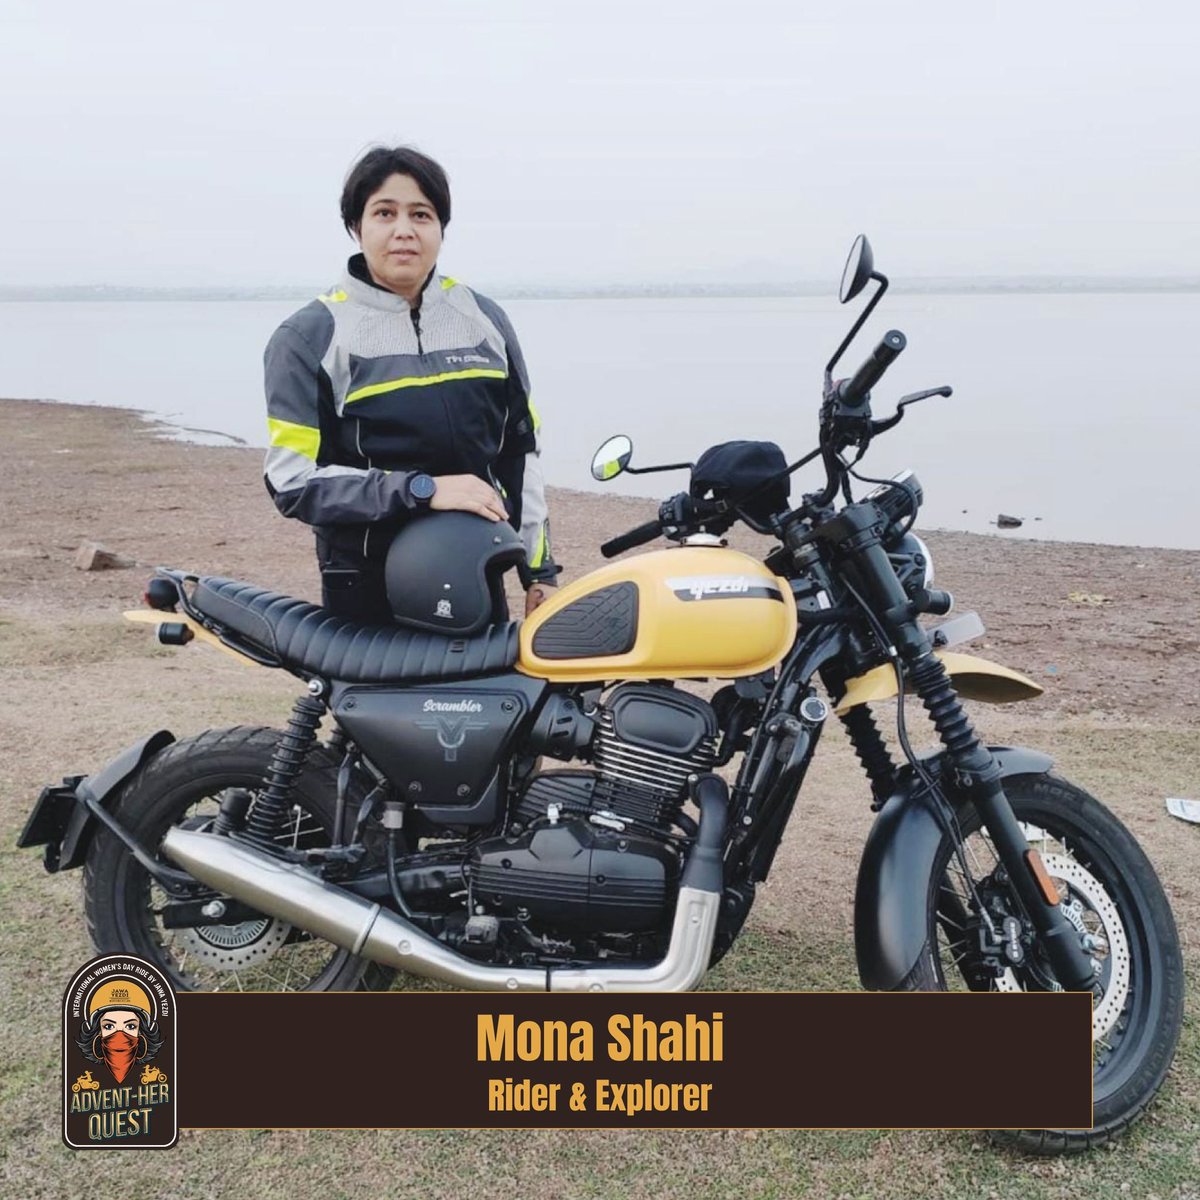 @MonaShahiMs recalls that her riding motivation came from a teacher who rode a scooter to her school everyday.
.
She says, 'Riding to me is freedom. Today, I am a proud owner of the #JawaPerak and #YezdiScrambler.'

#JawaYezdiMotorcycles #JawaYezdiWomen #IWD2023 #Jawa #Yezdi